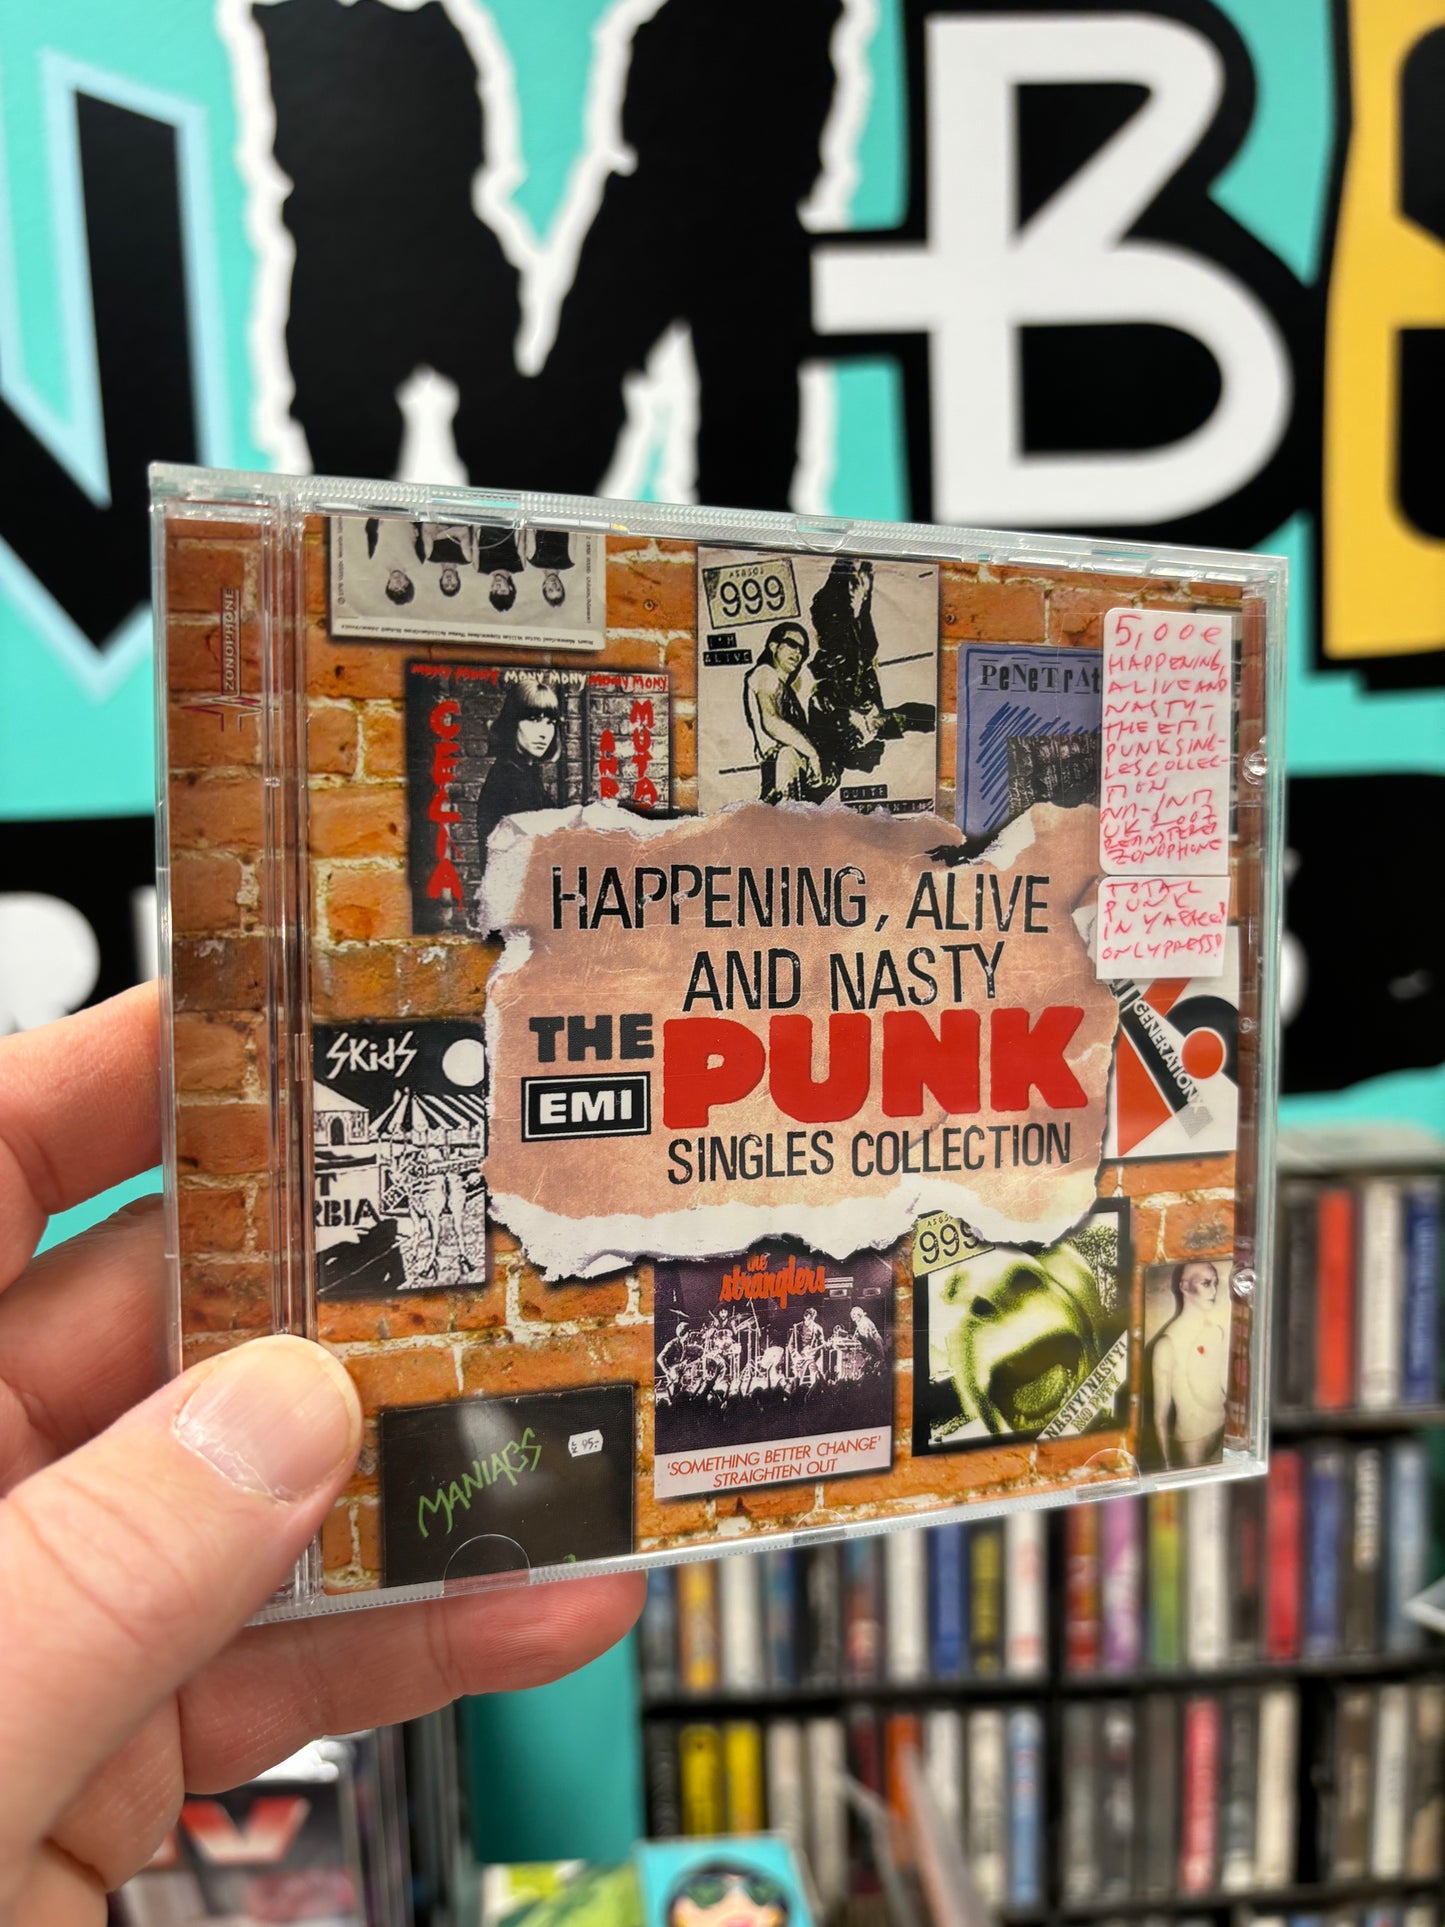 Happening, Alive And Nasty (The EMI Punk Singles Collection), CD, UK 2007